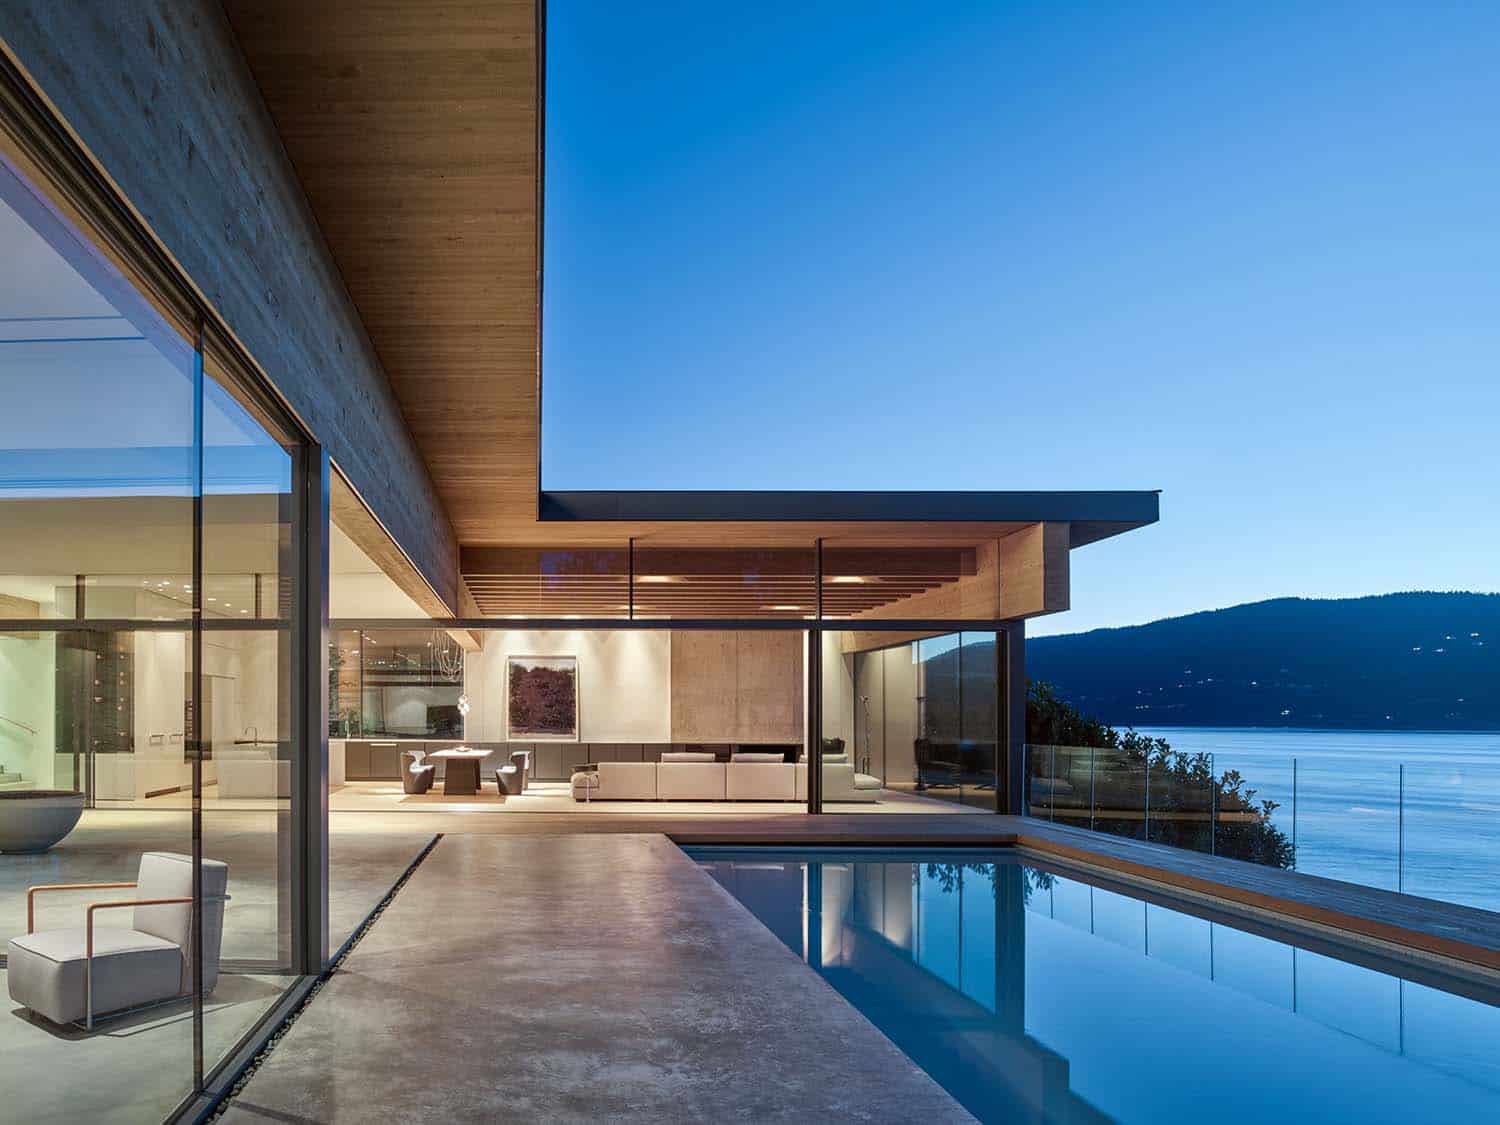 An amazing luxury house overlooking the sea in West Vancouver Canada